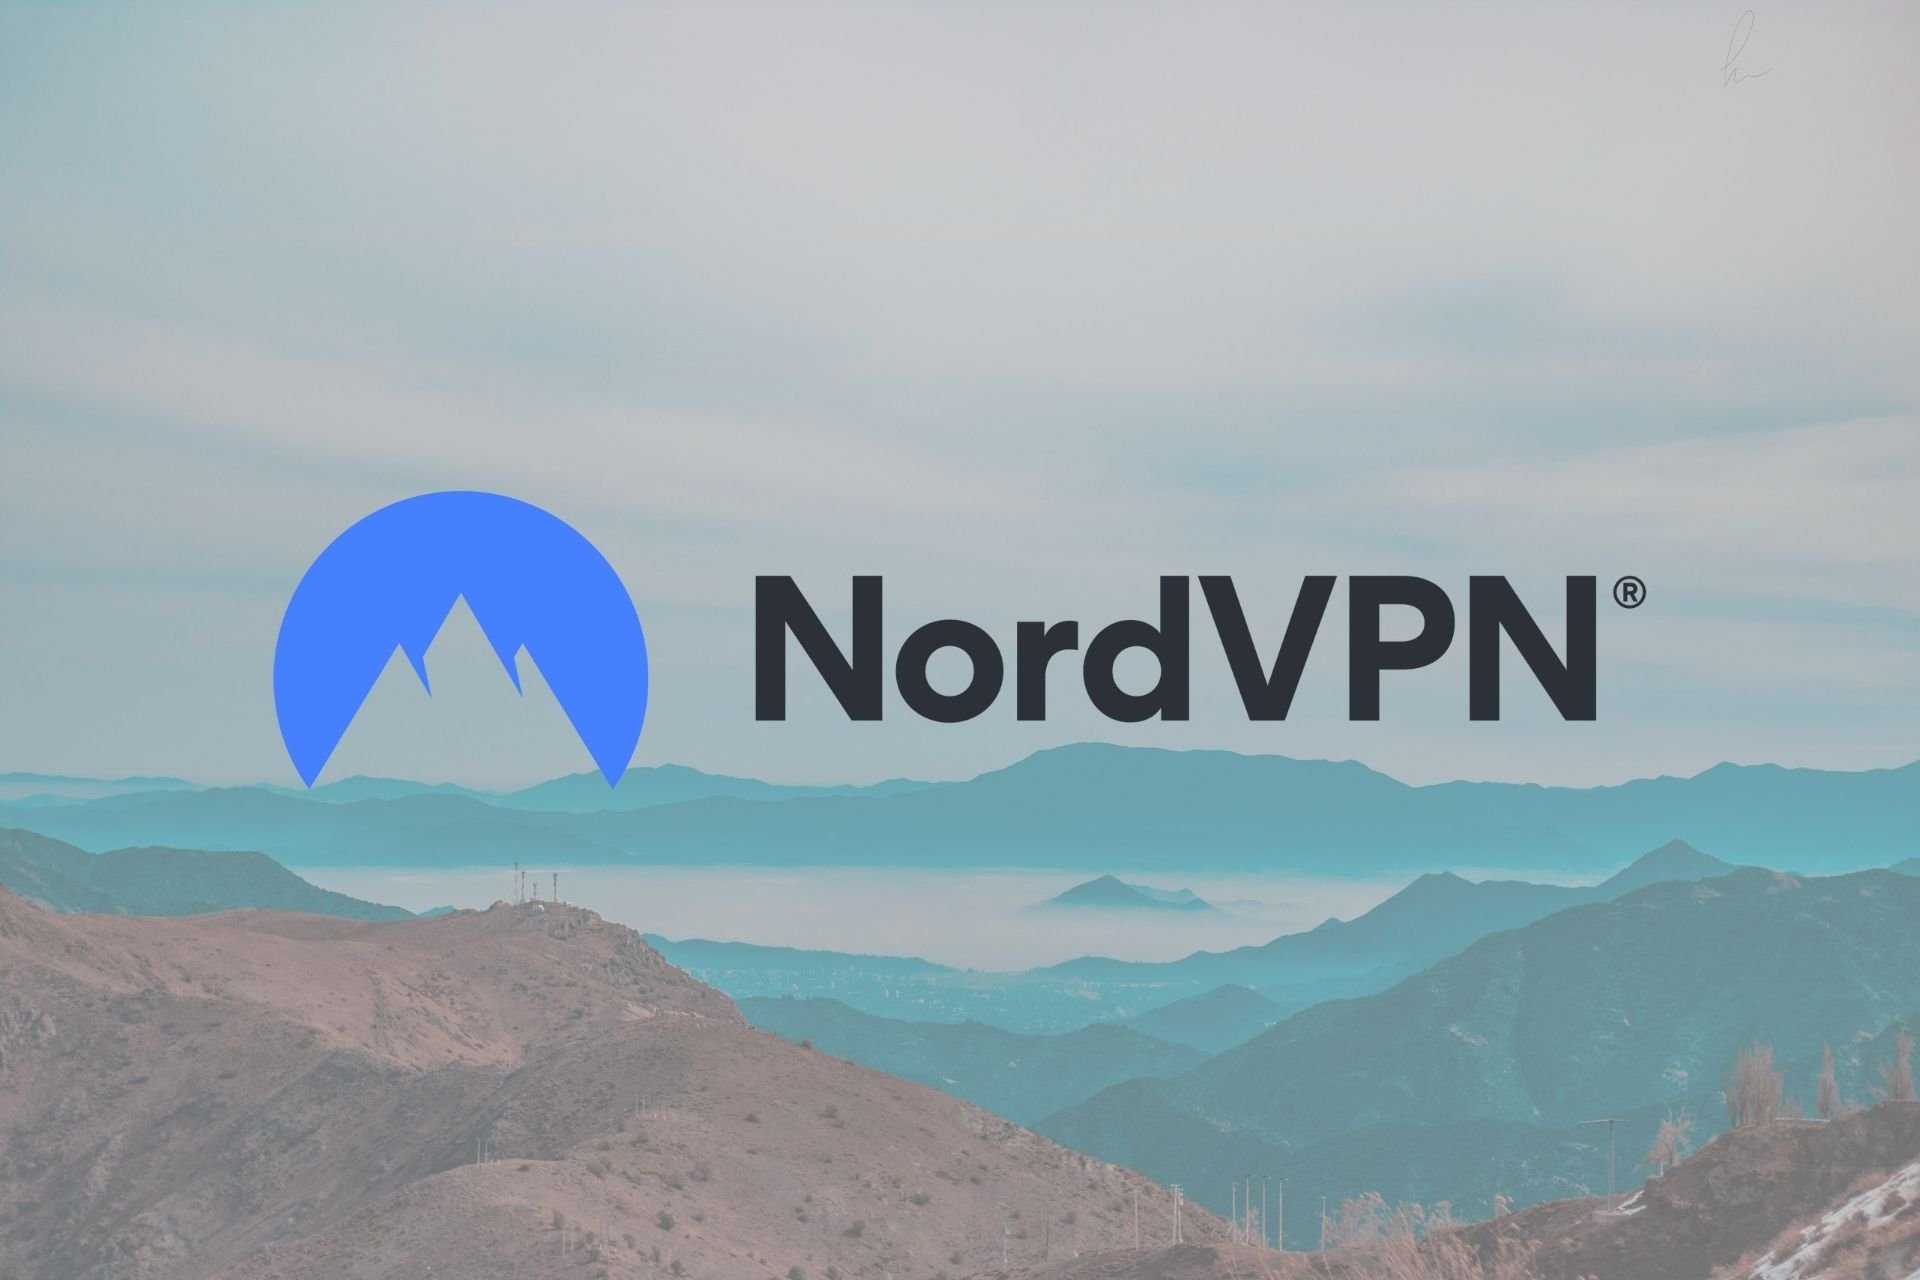 Nordvpn Review - Protect Your Online Privacy & Activity.